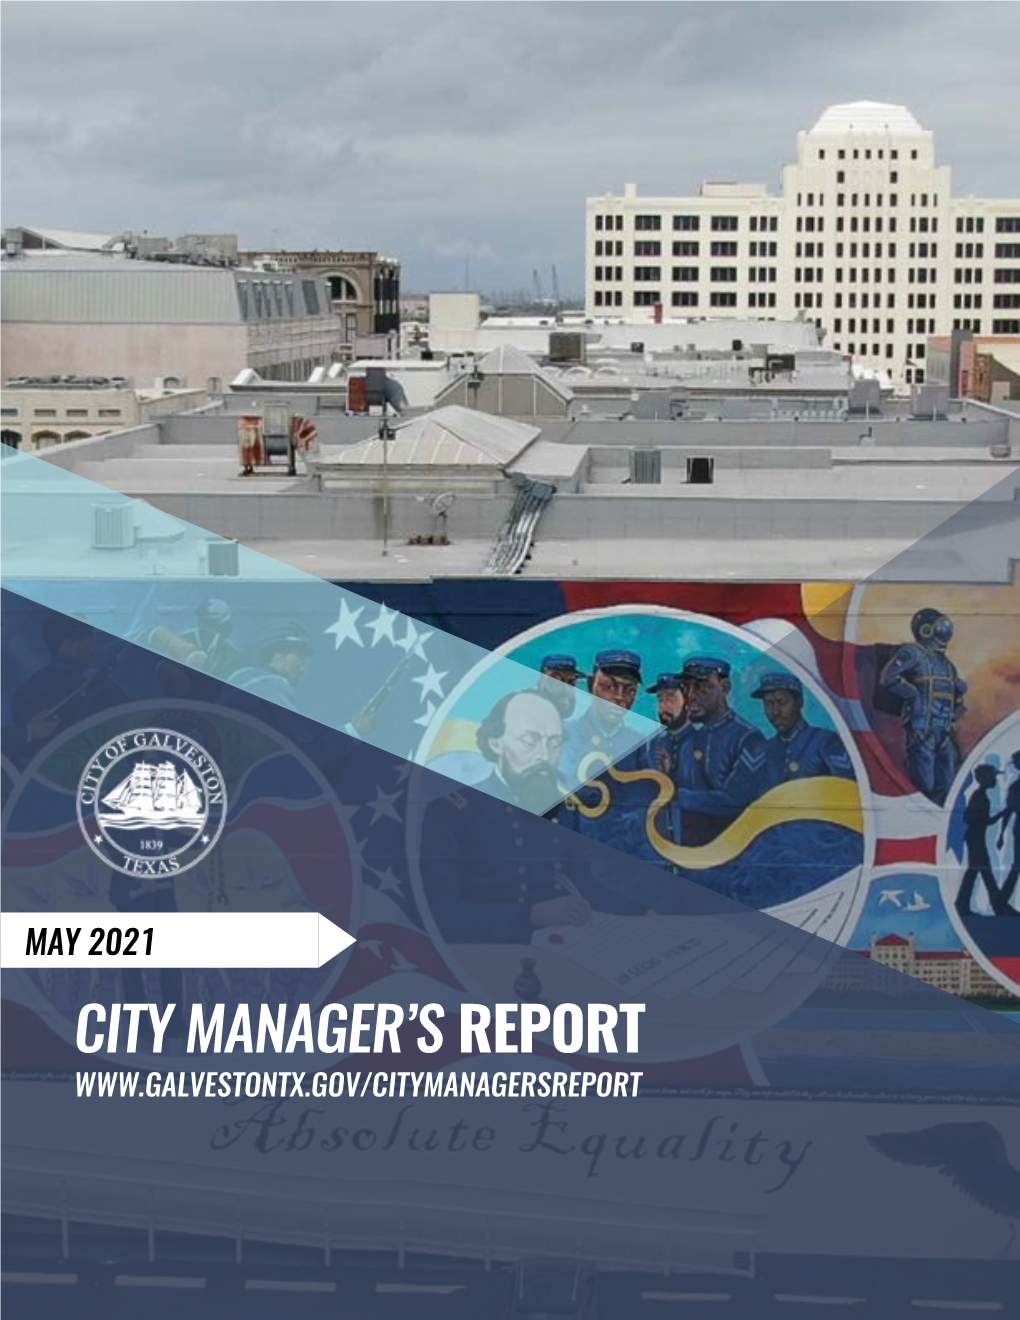 May 2021 City Manager's Report